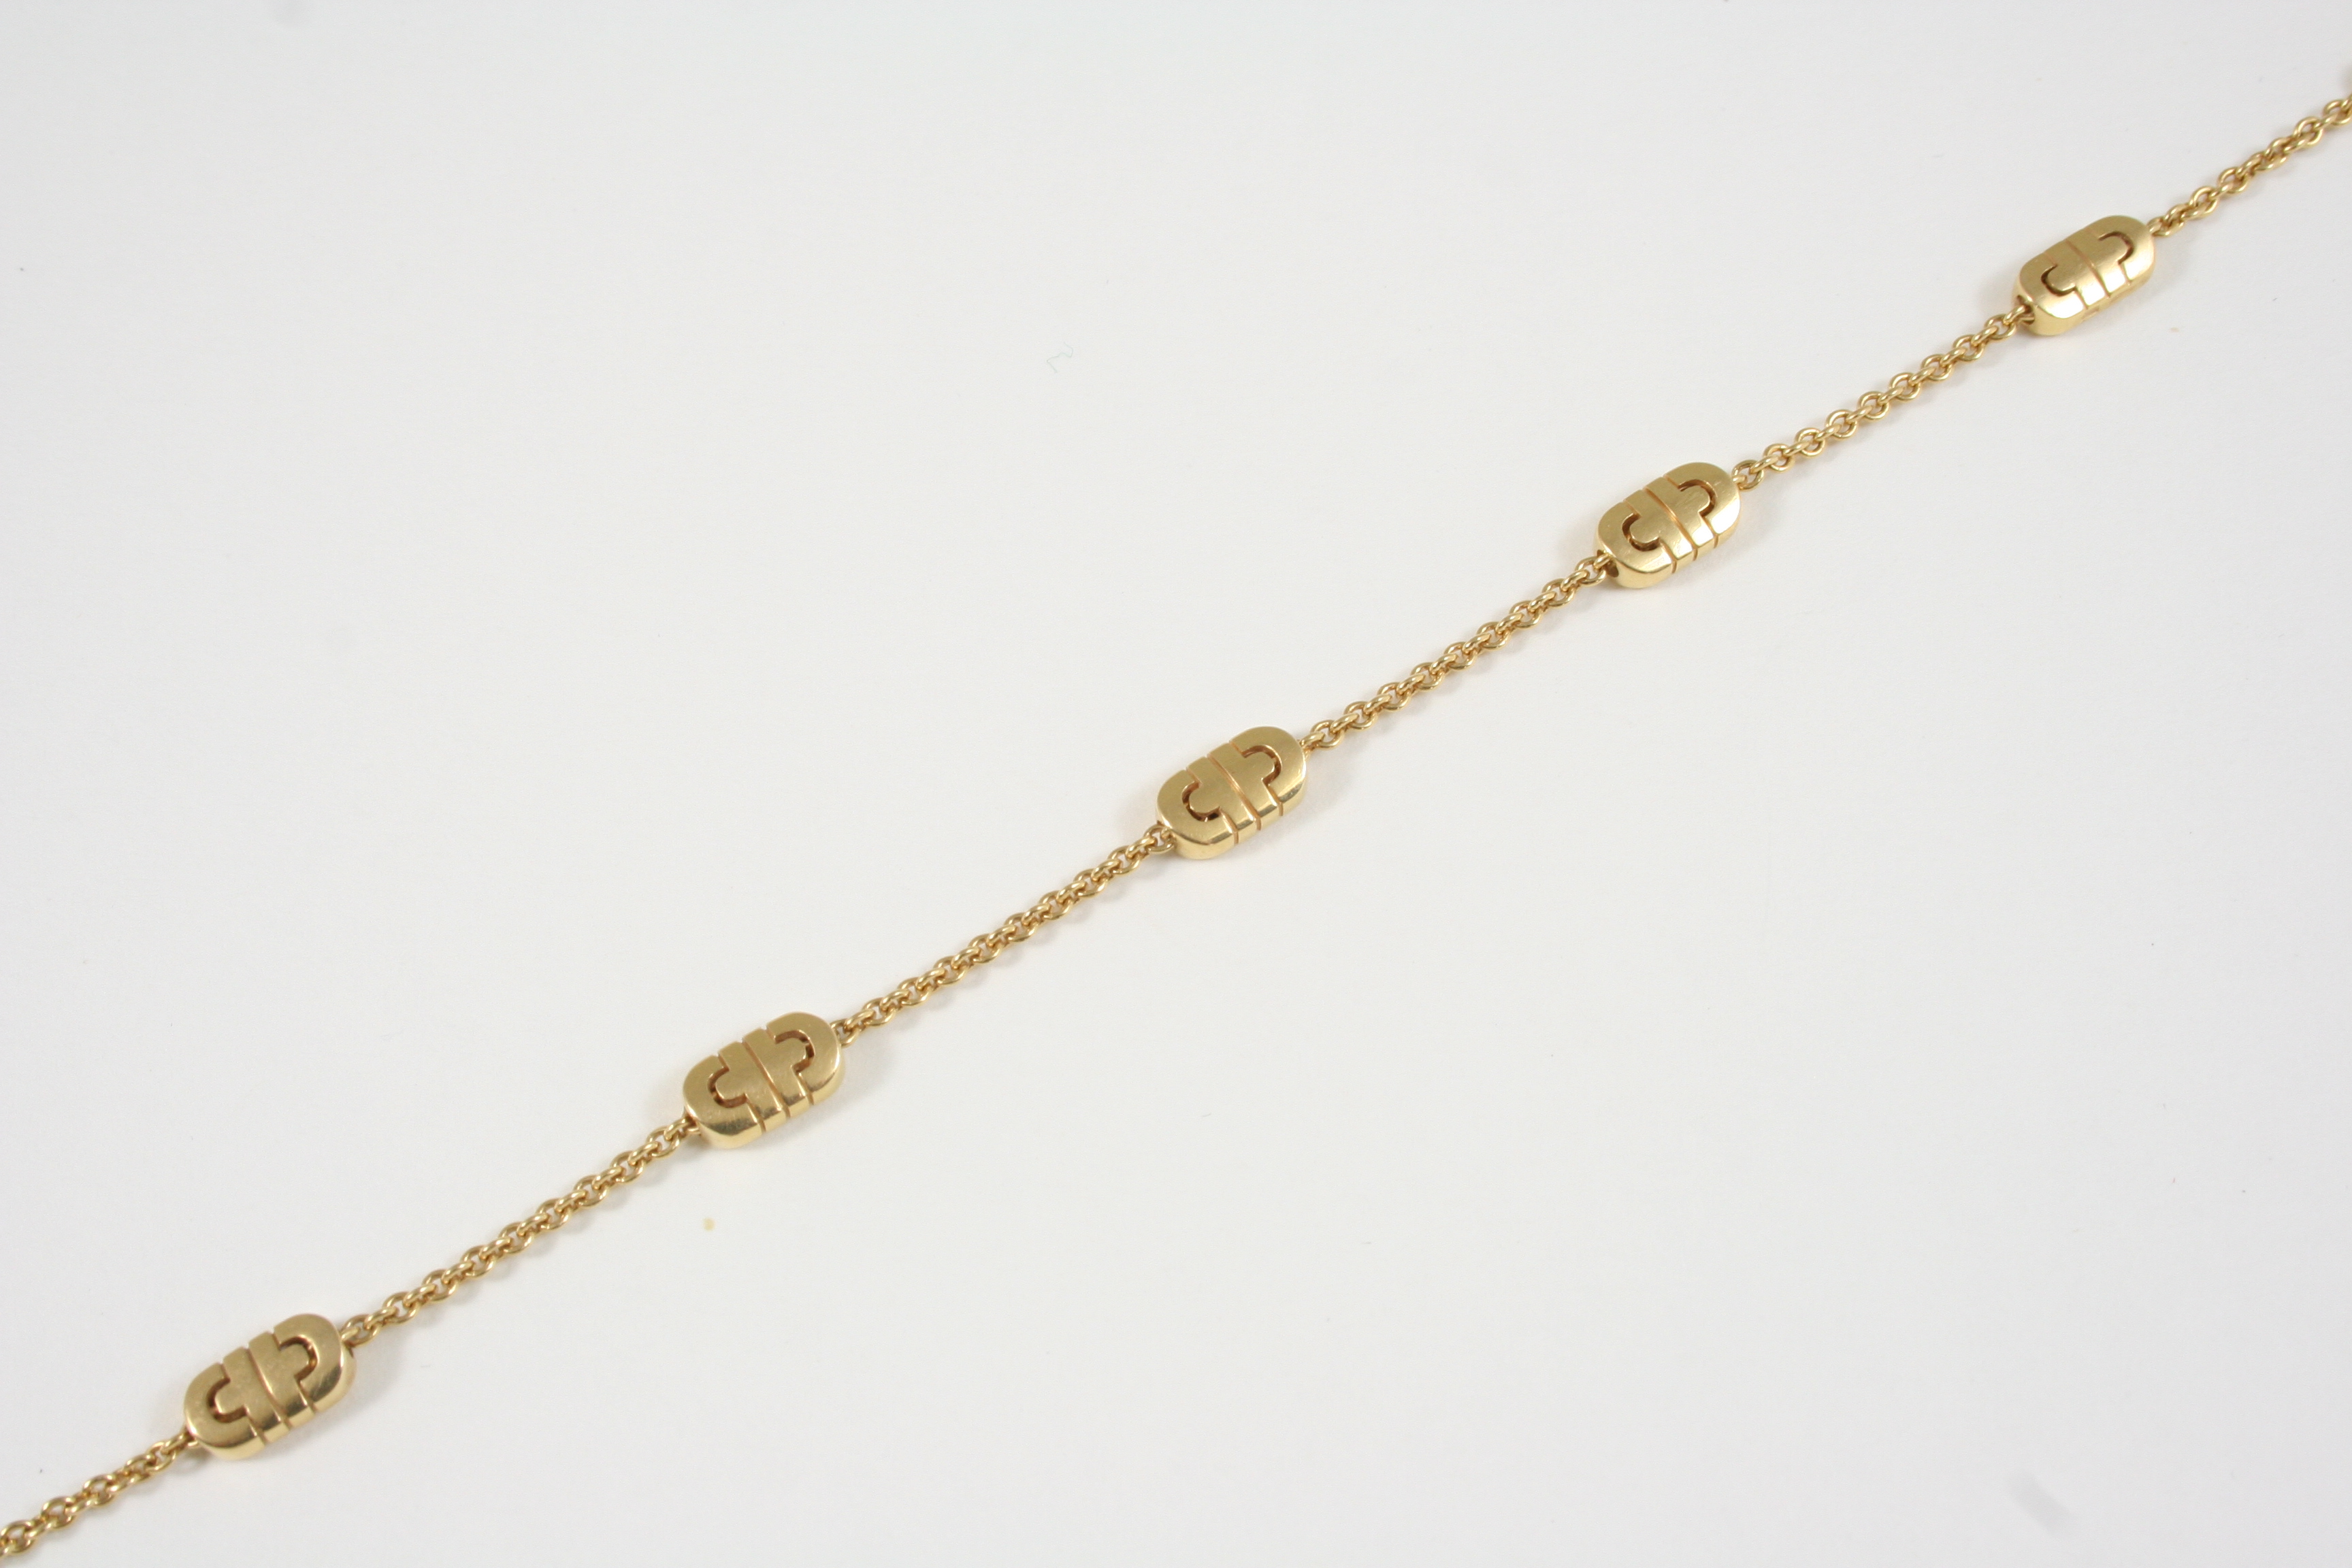 AN 18CT. GOLD BRACELET BY BVLGARI formed with oval geometric links to a gold chain, signed to the